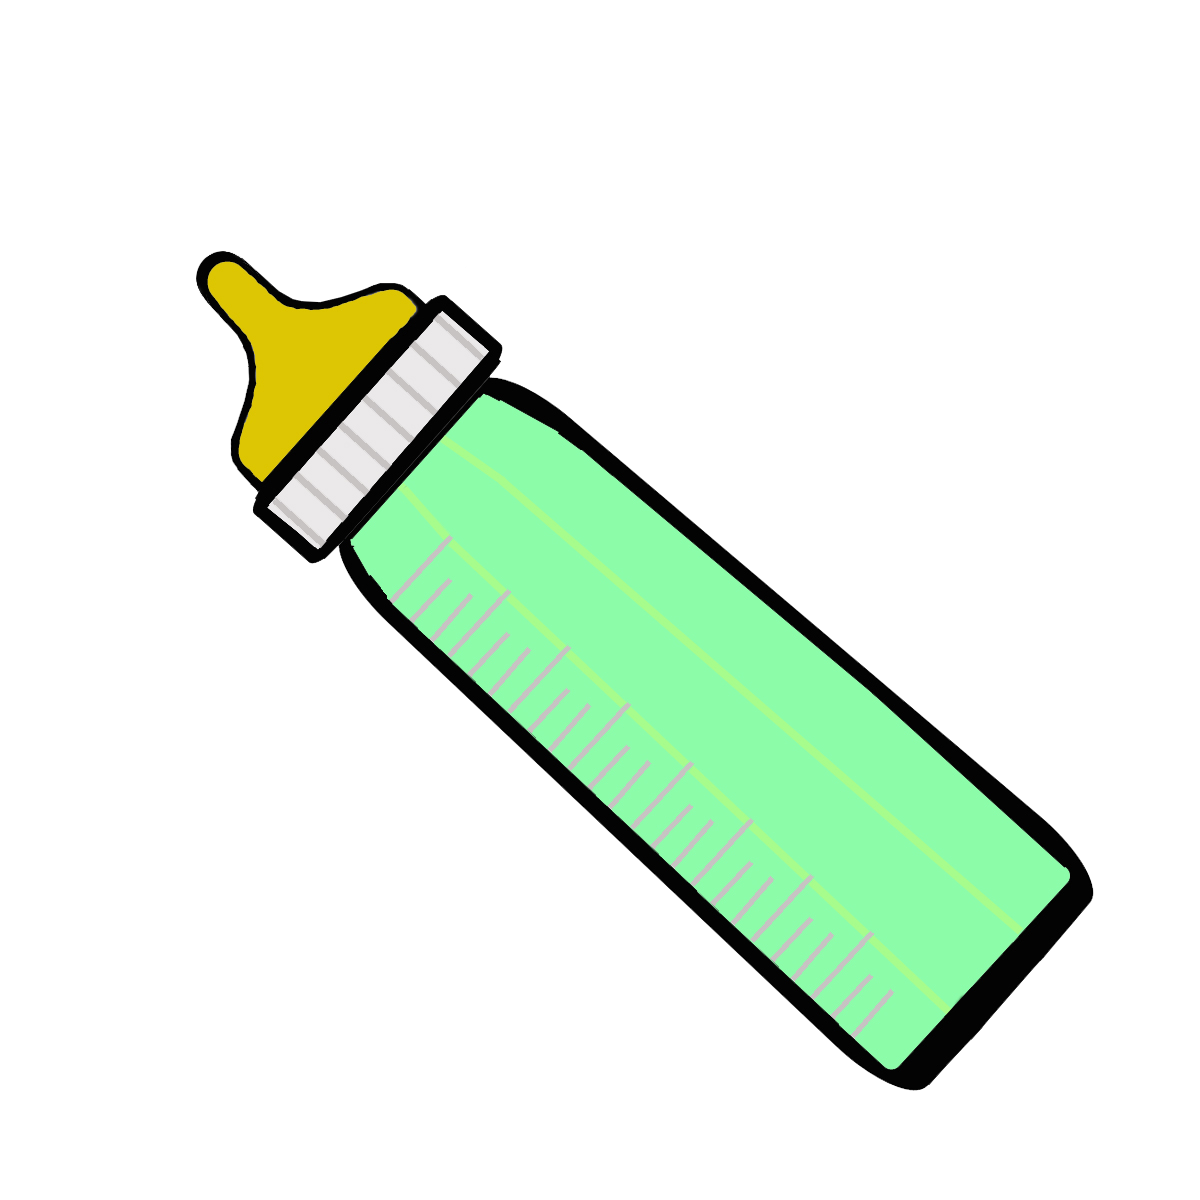 Baby Bottle PNG Picture